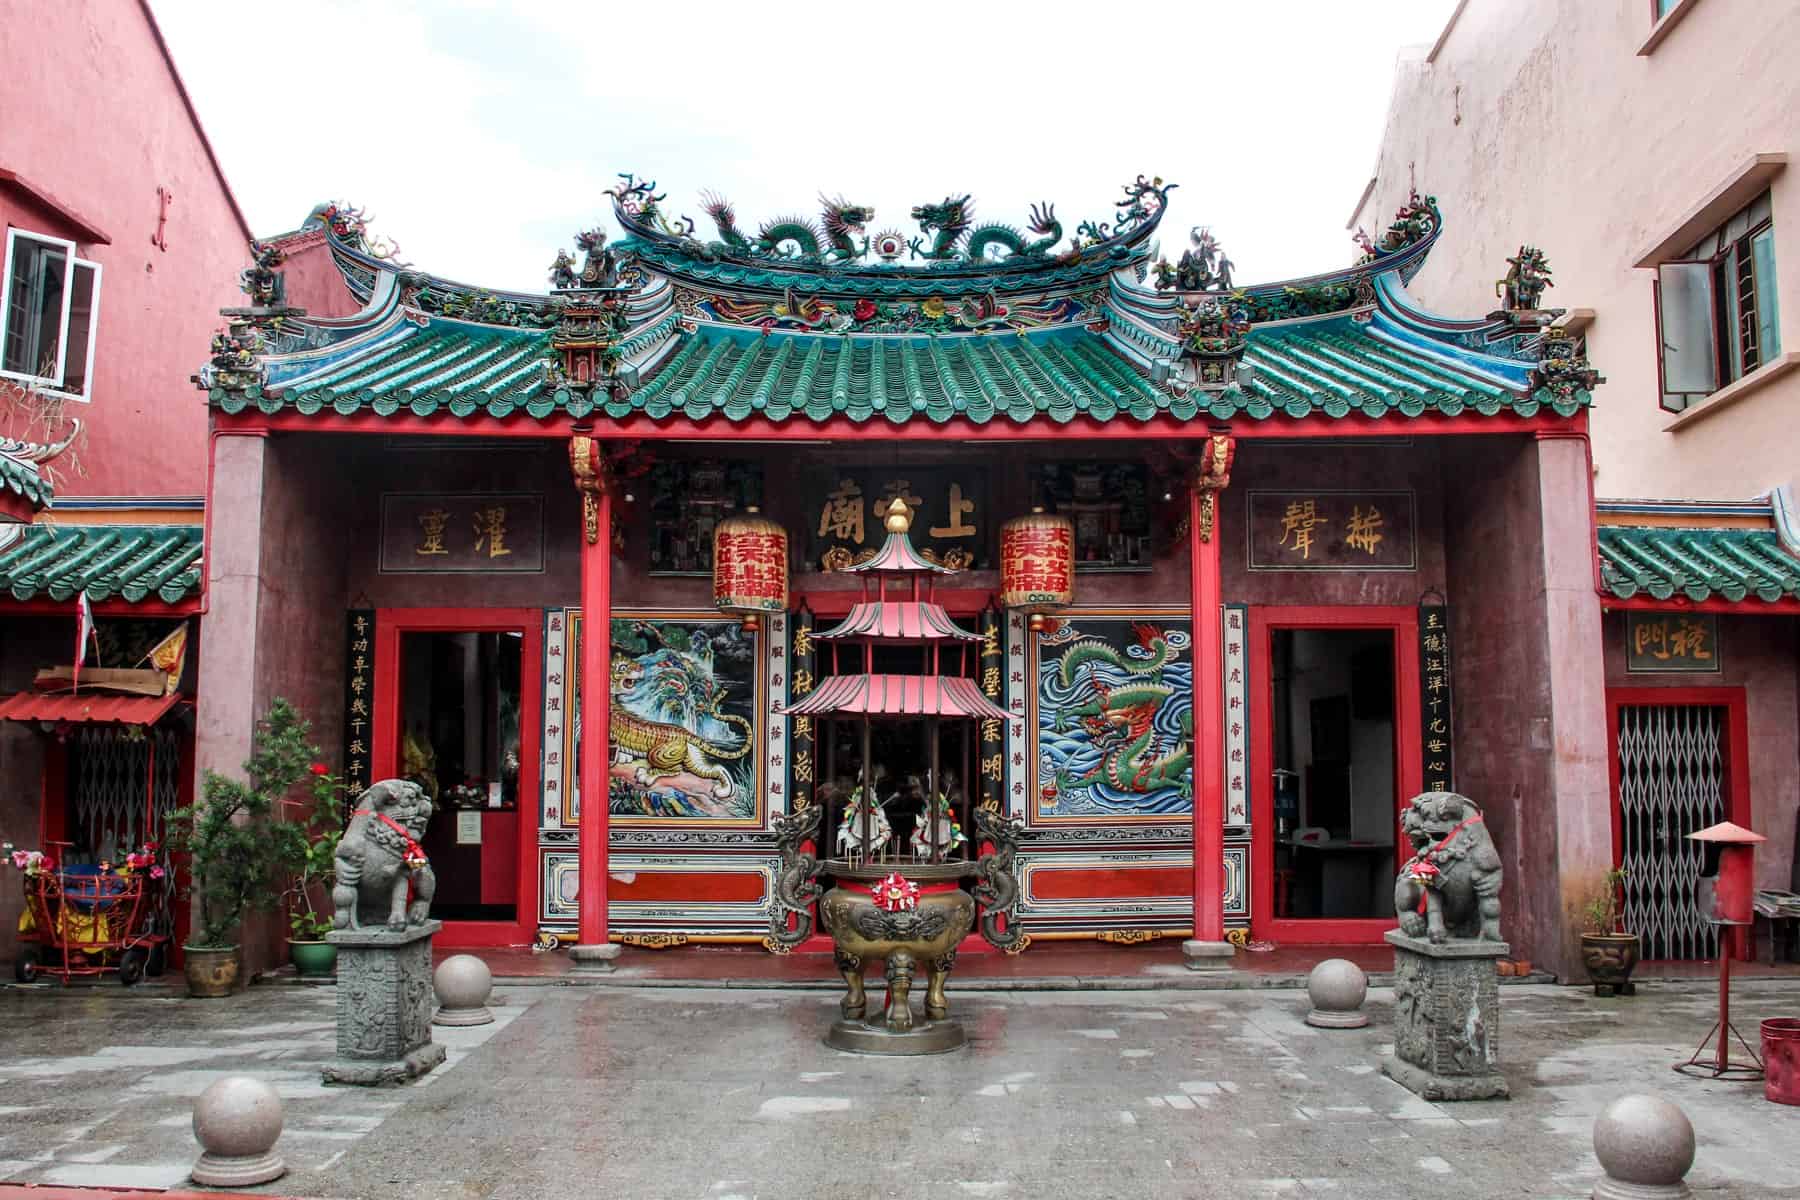 A turquoise upside down bat roof with dragon structures and the red columns with lanterns and dragon wall paintings mark the entrance of Kuching's Oldest Temple of Tua Pek Kong